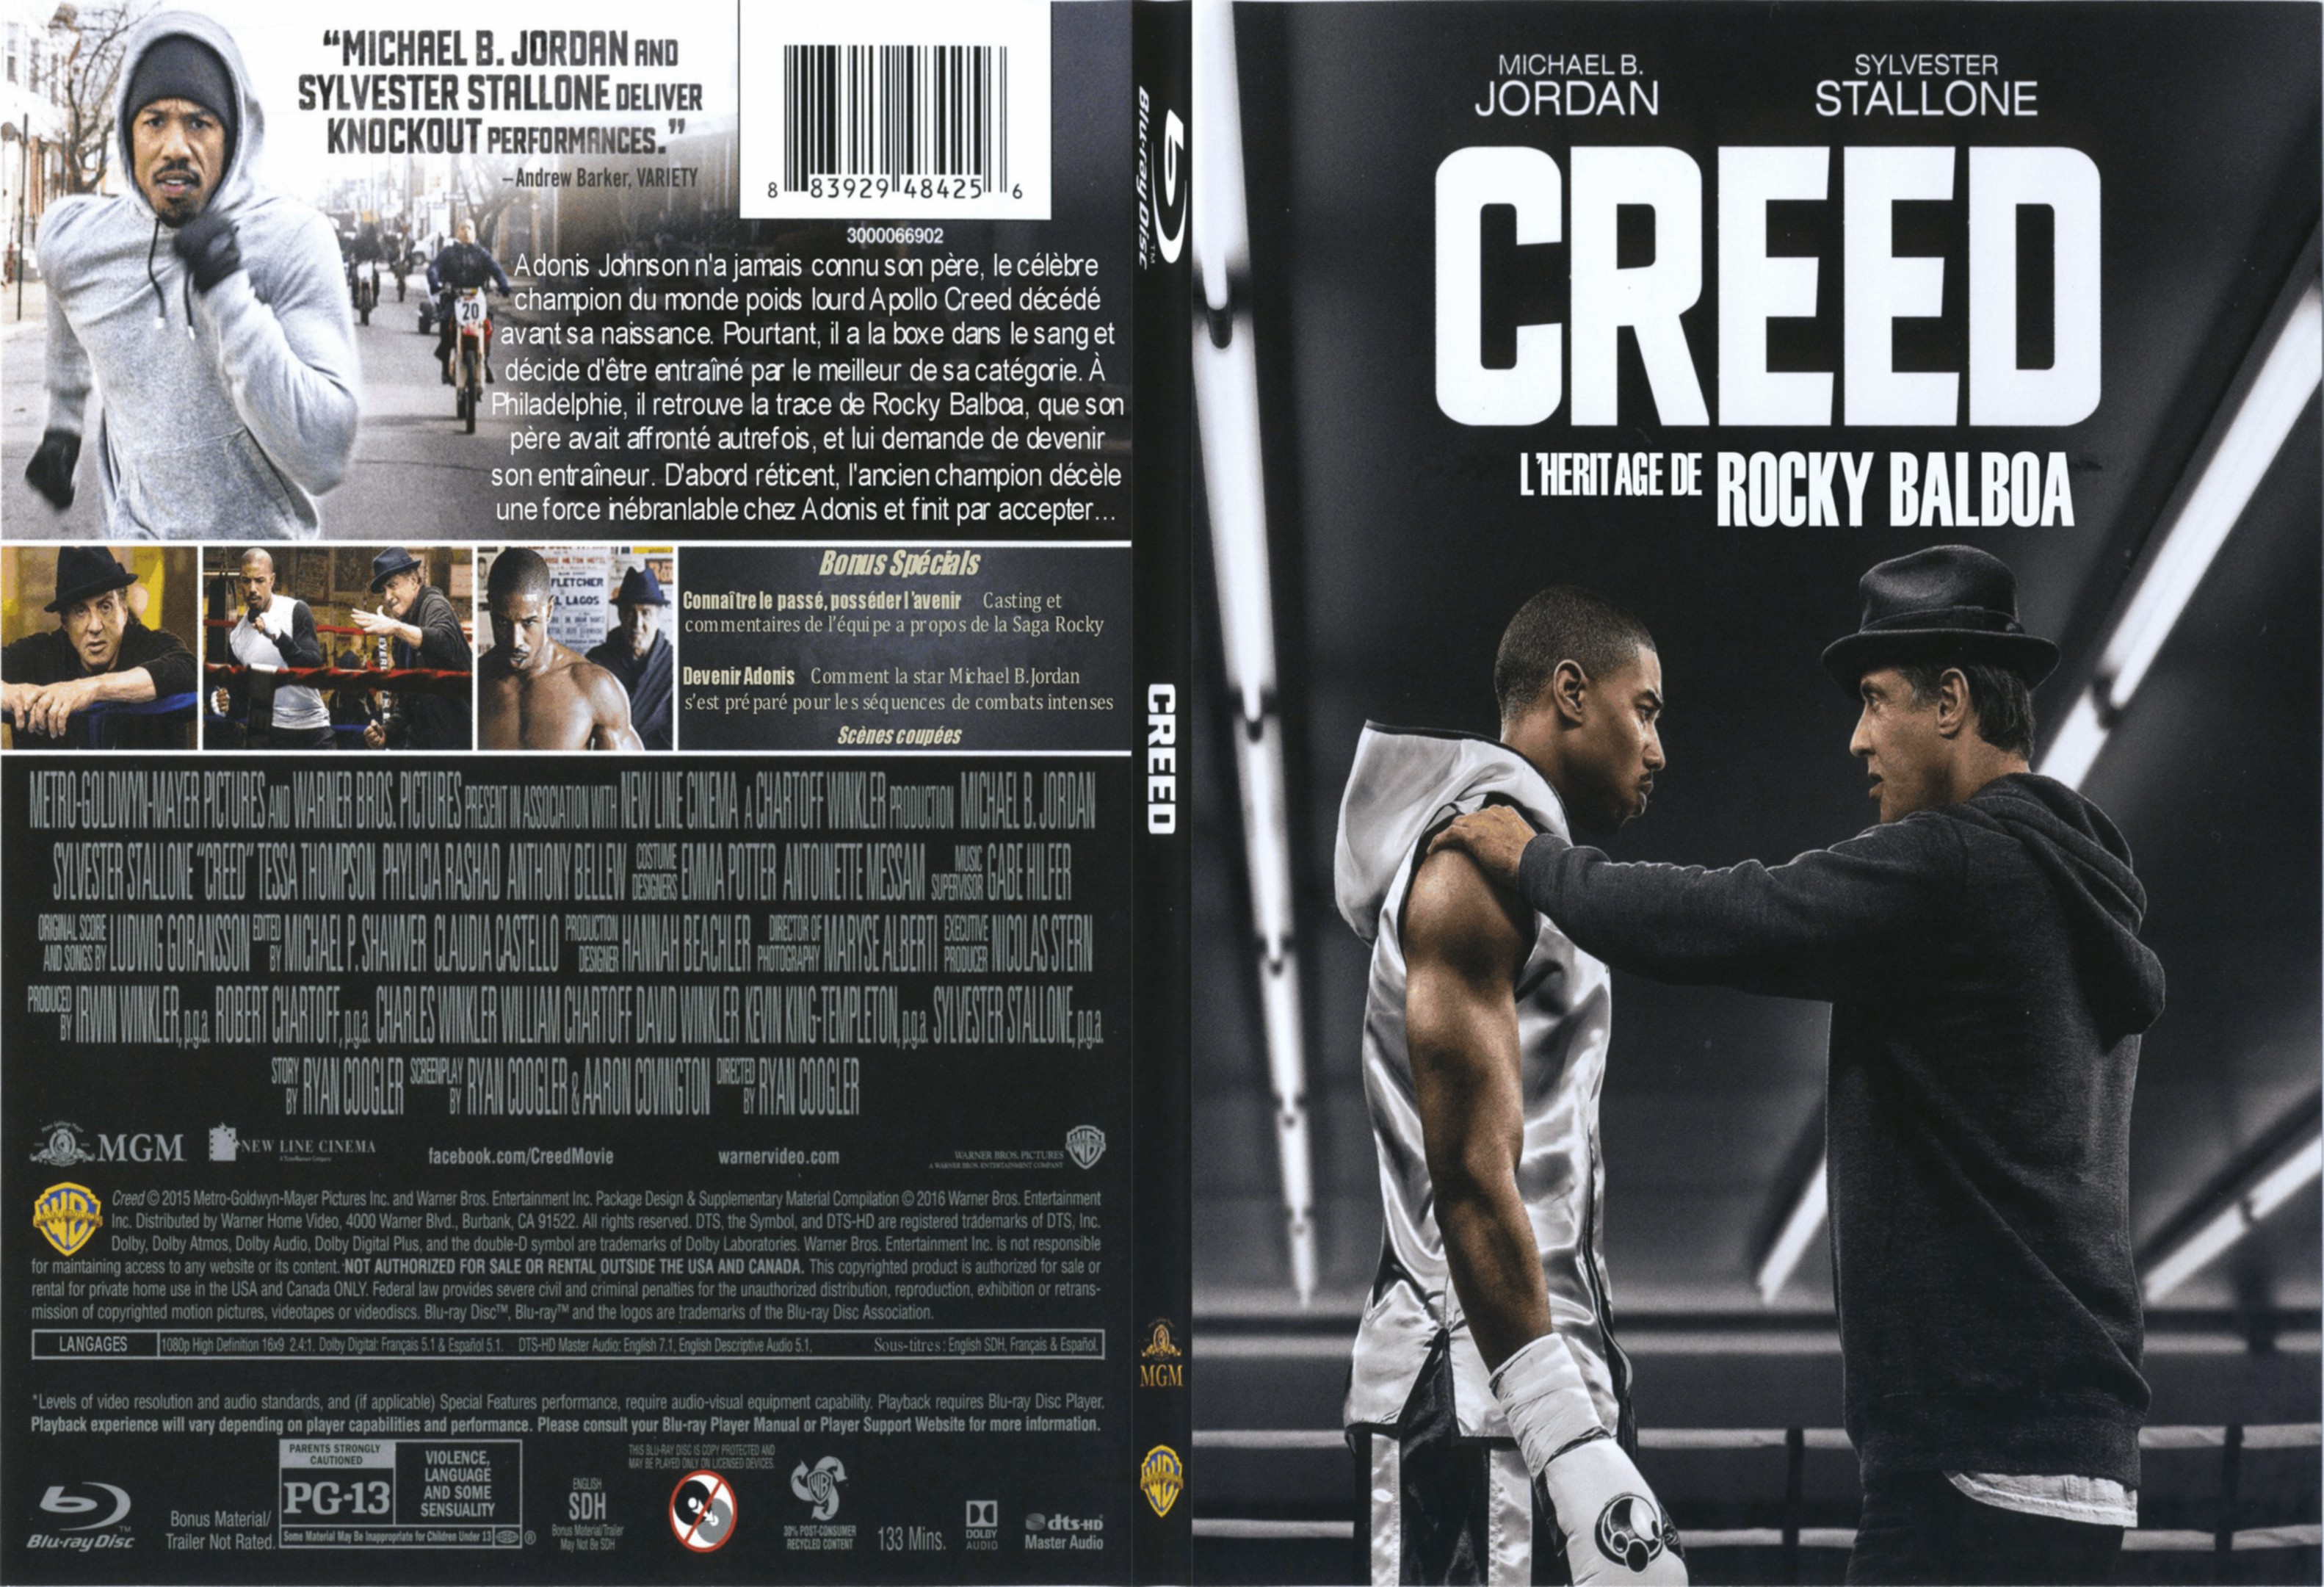 Jaquette DVD Creed - SLIM